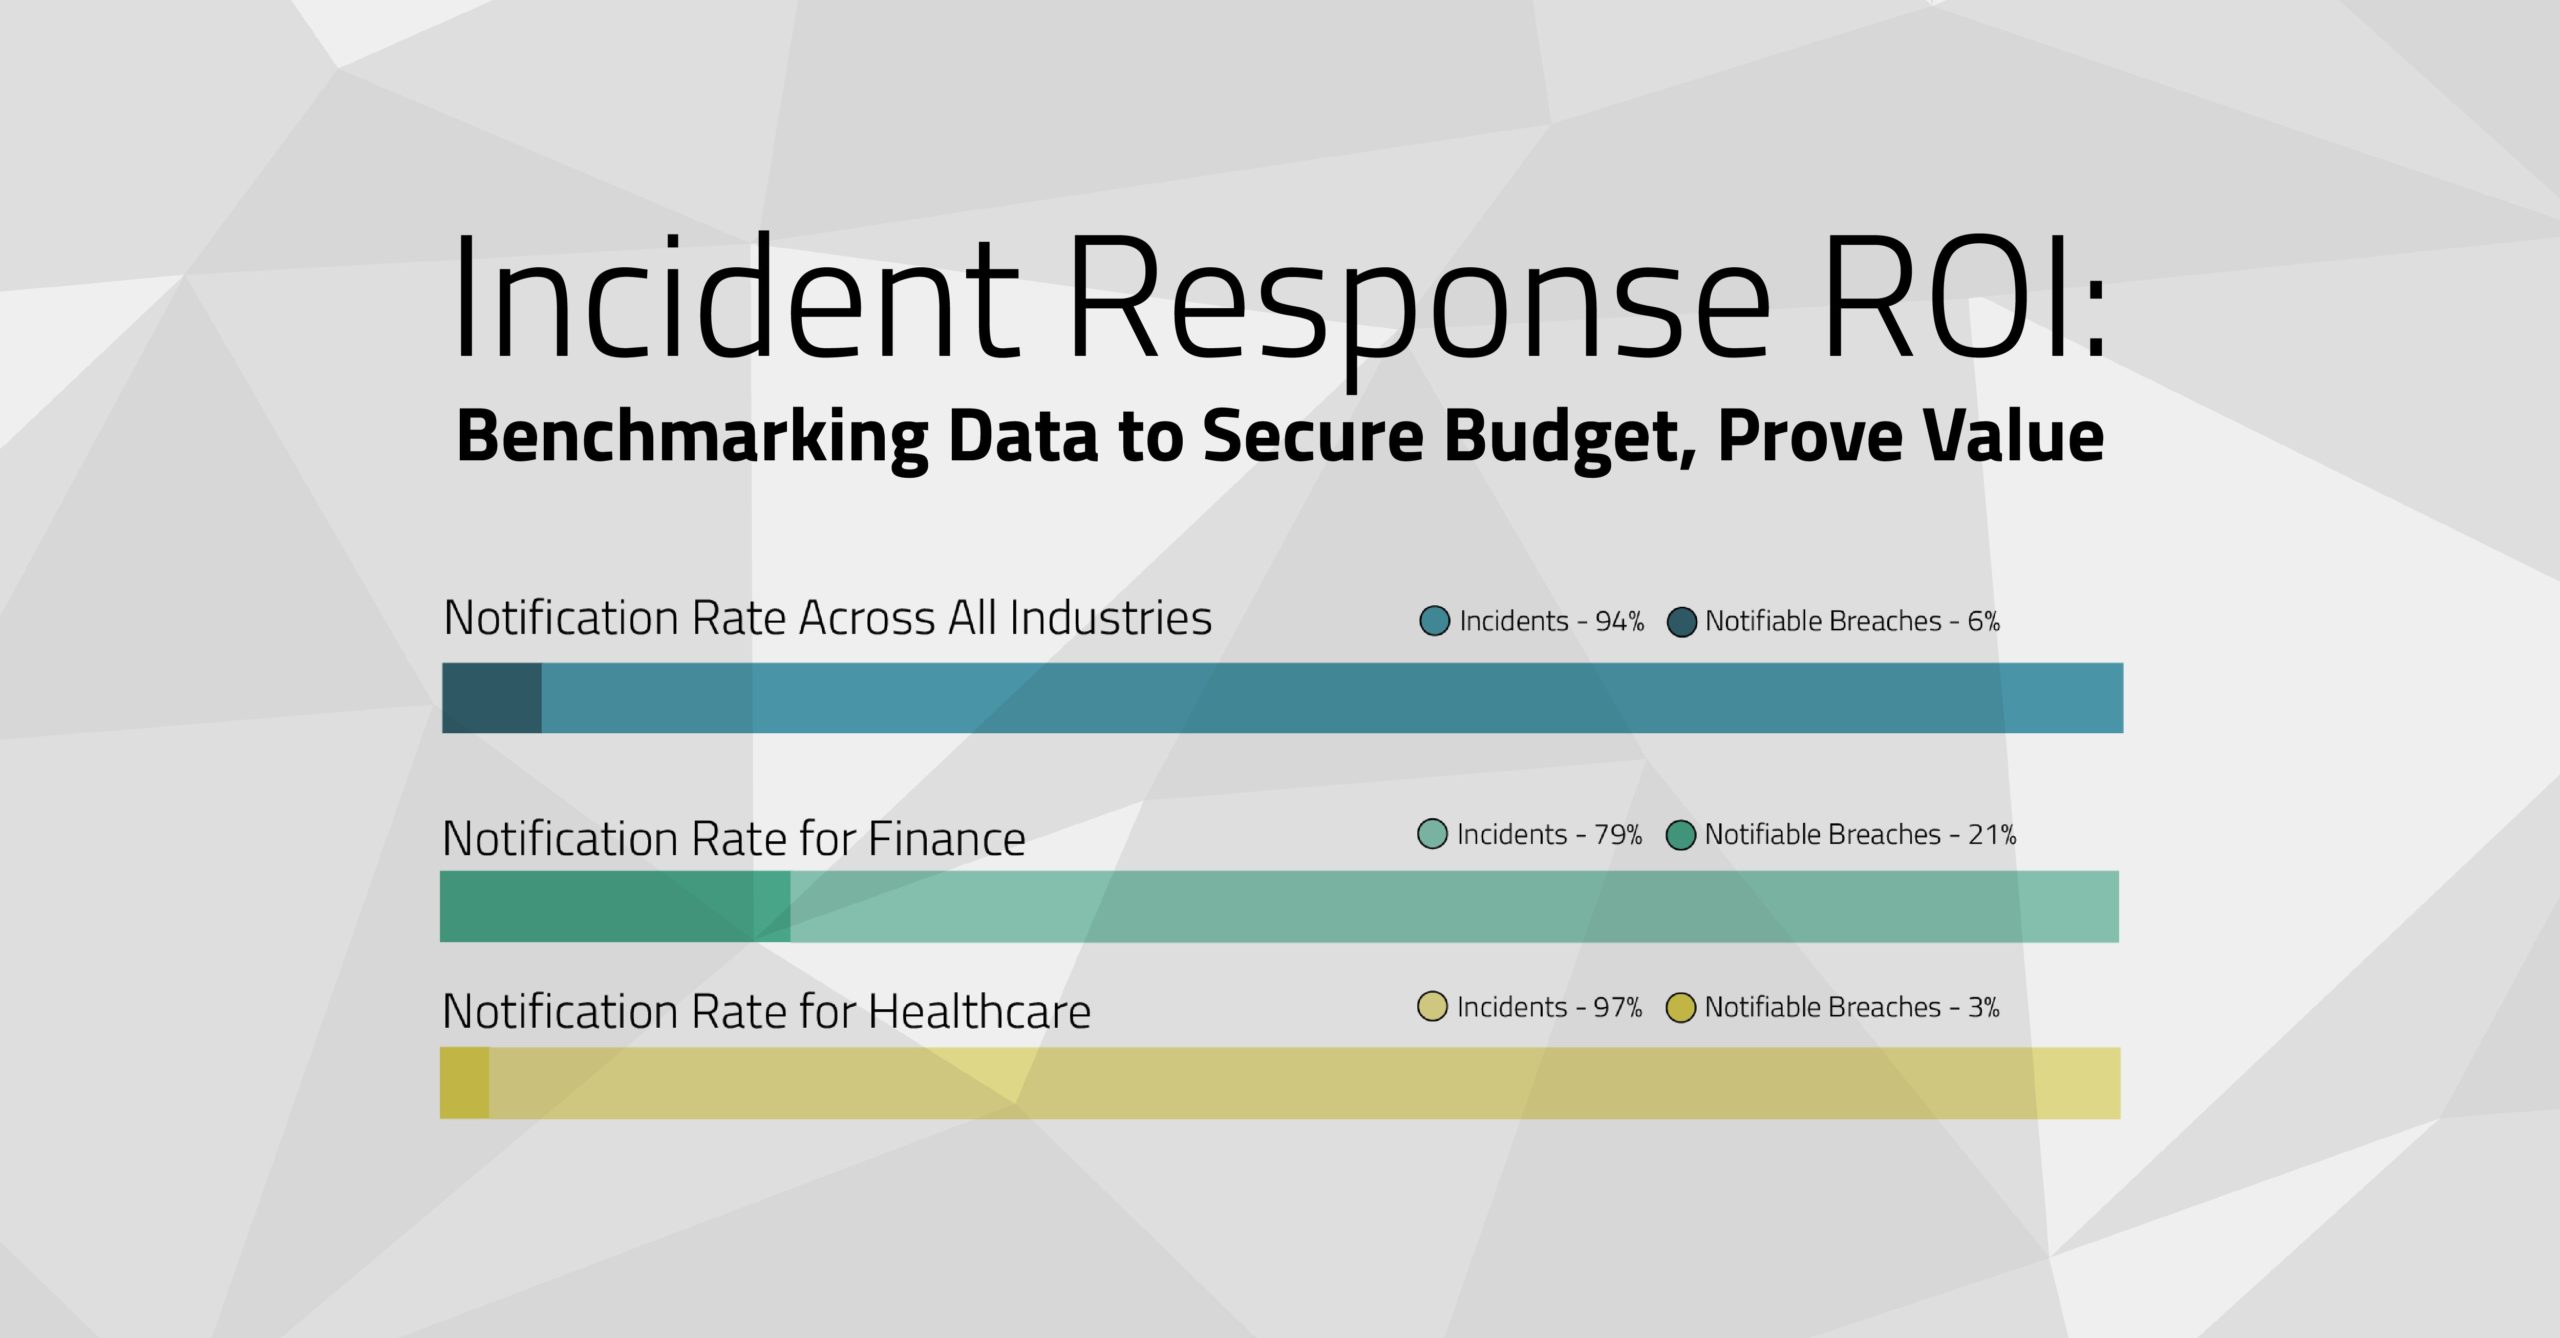 Incident response ROI Benchmarking data to secure budget, prove value